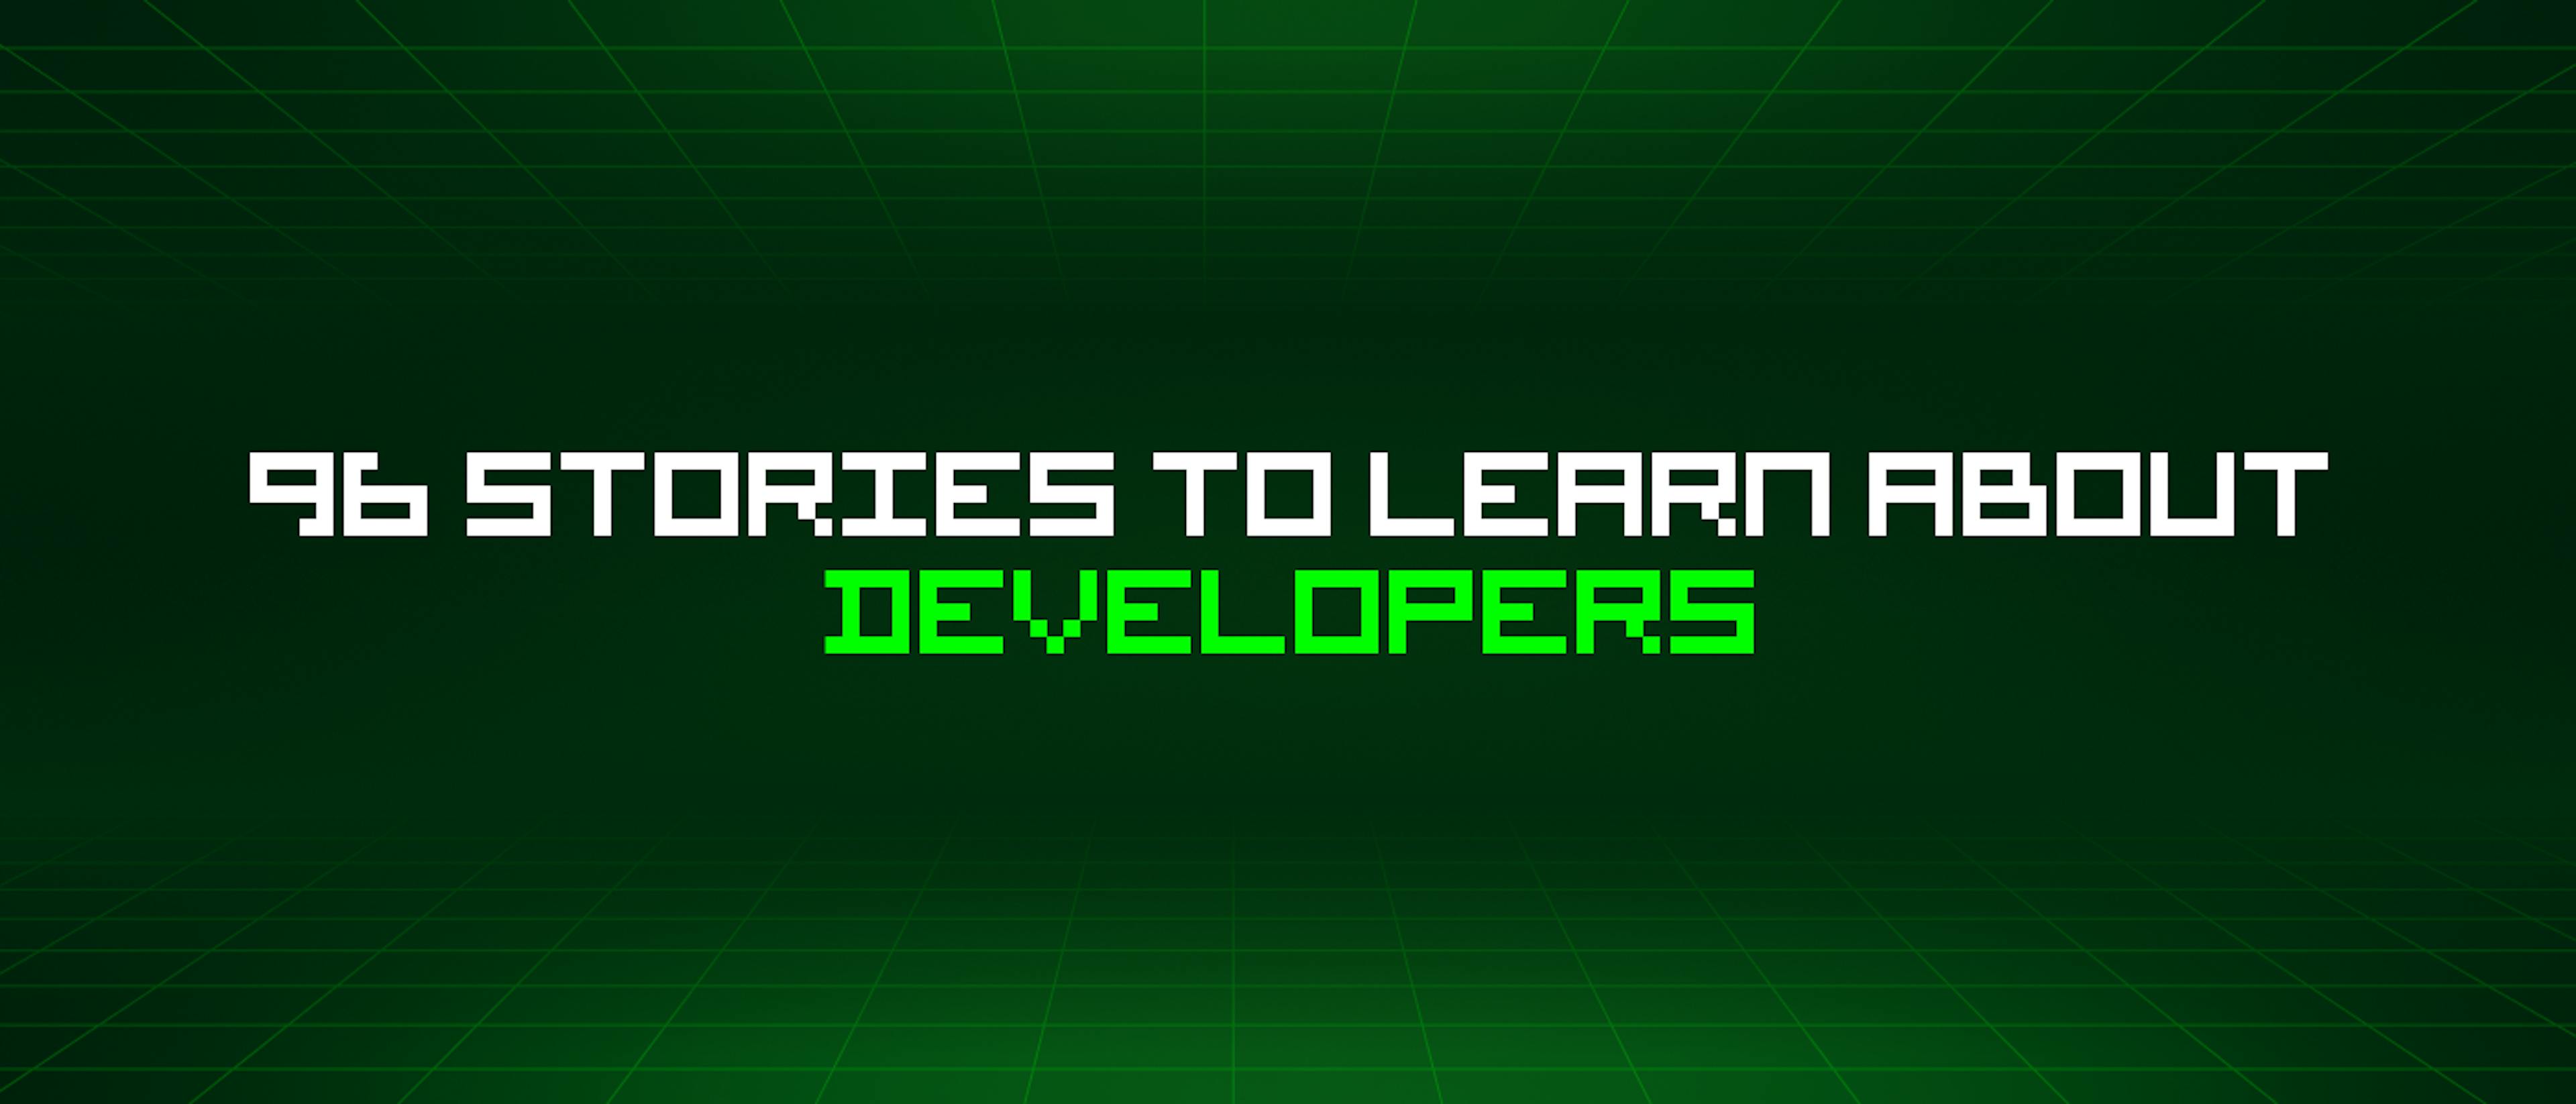 featured image - 96 Stories To Learn About Developers